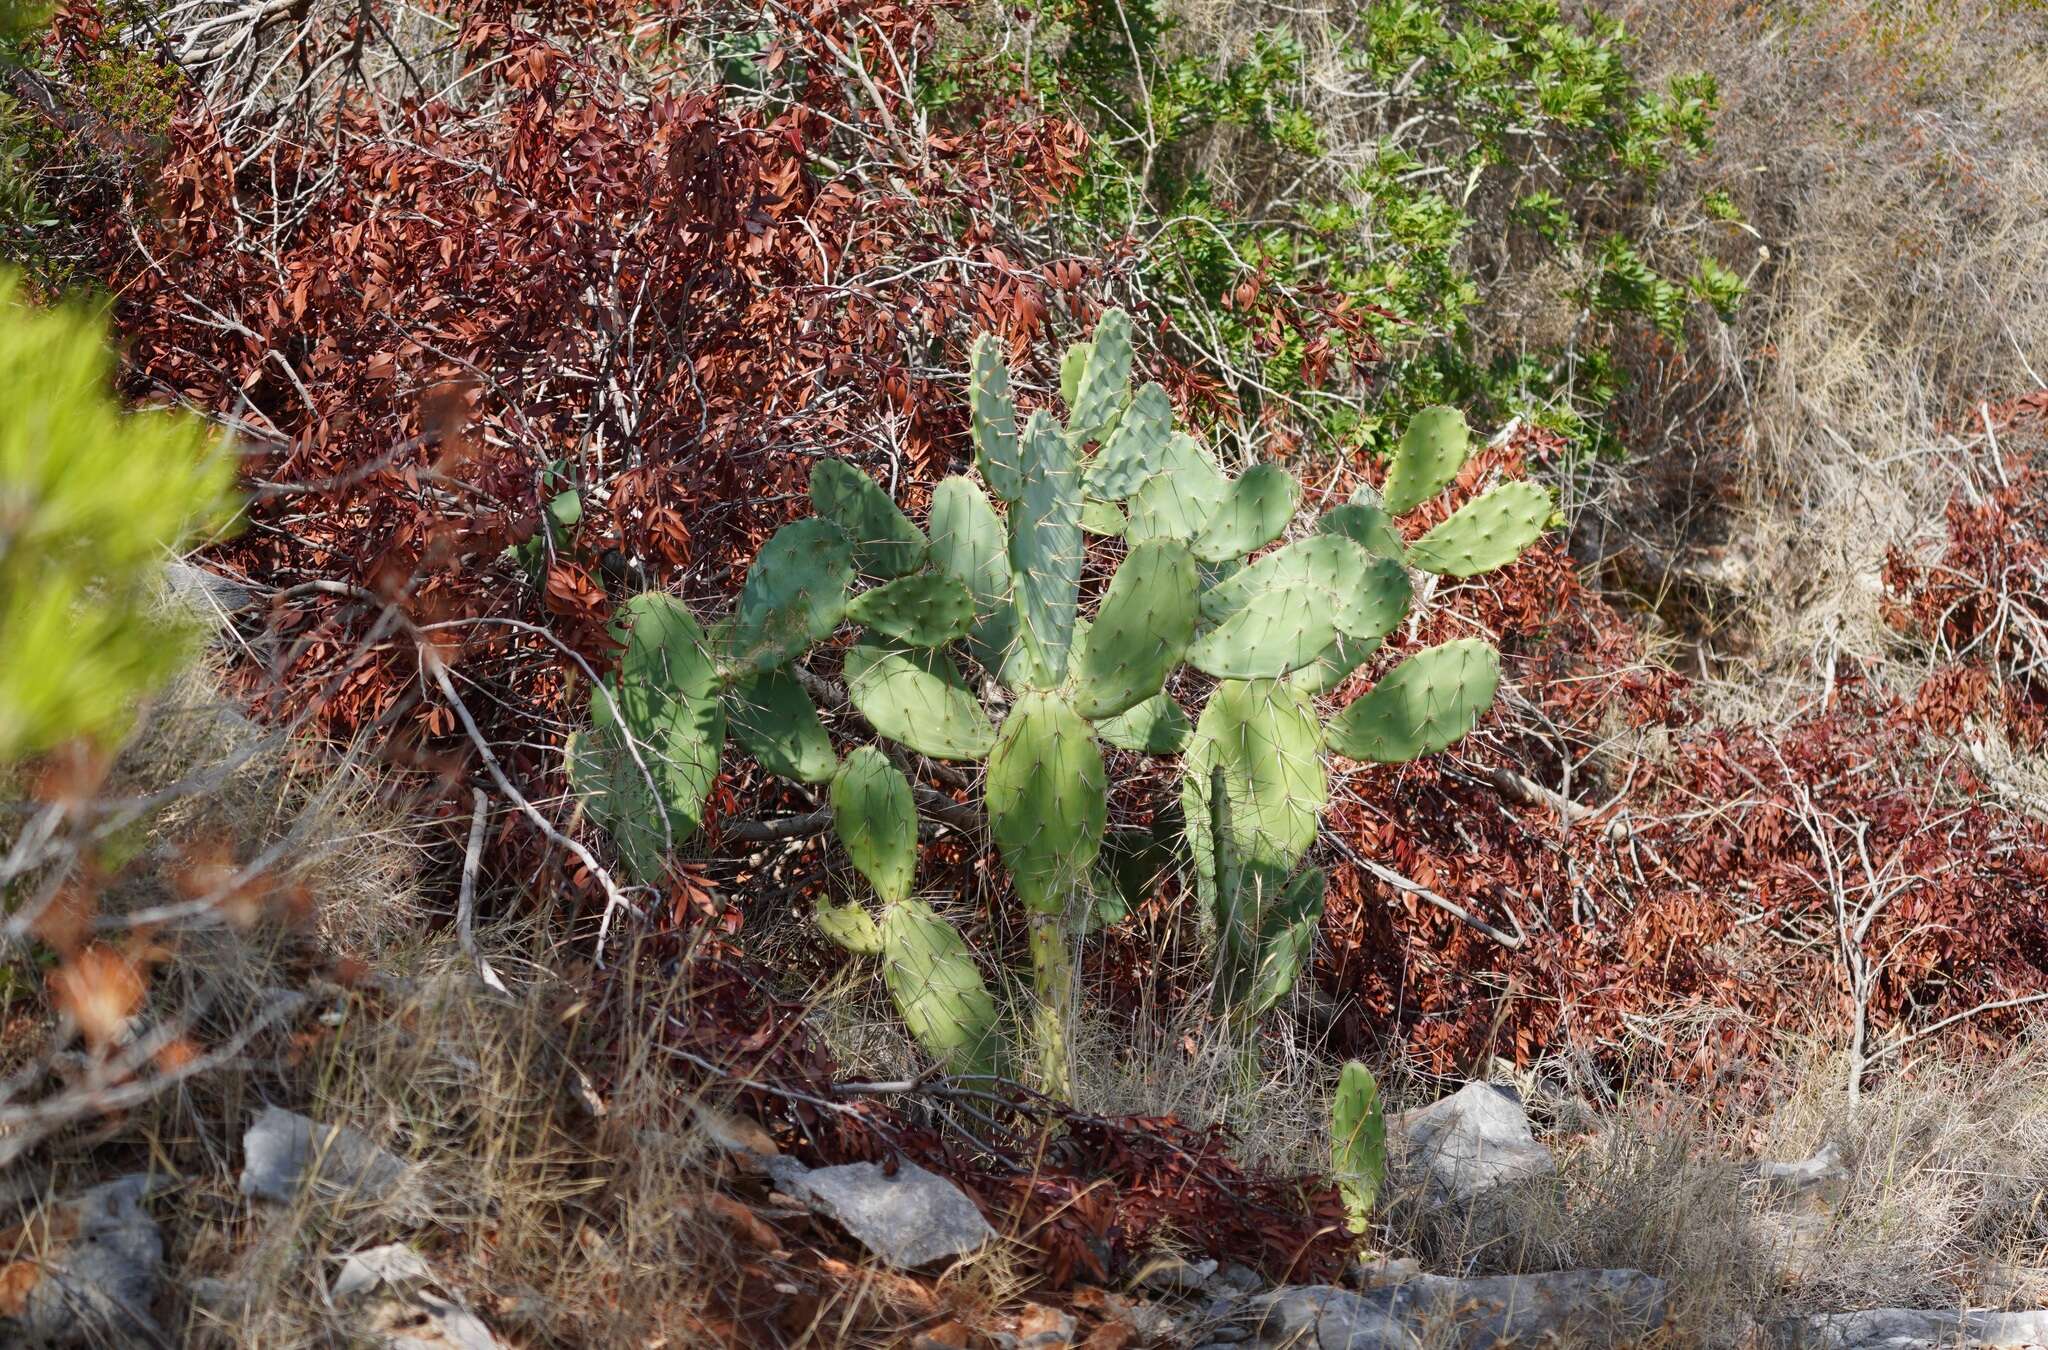 Image of French Prickle Cactus